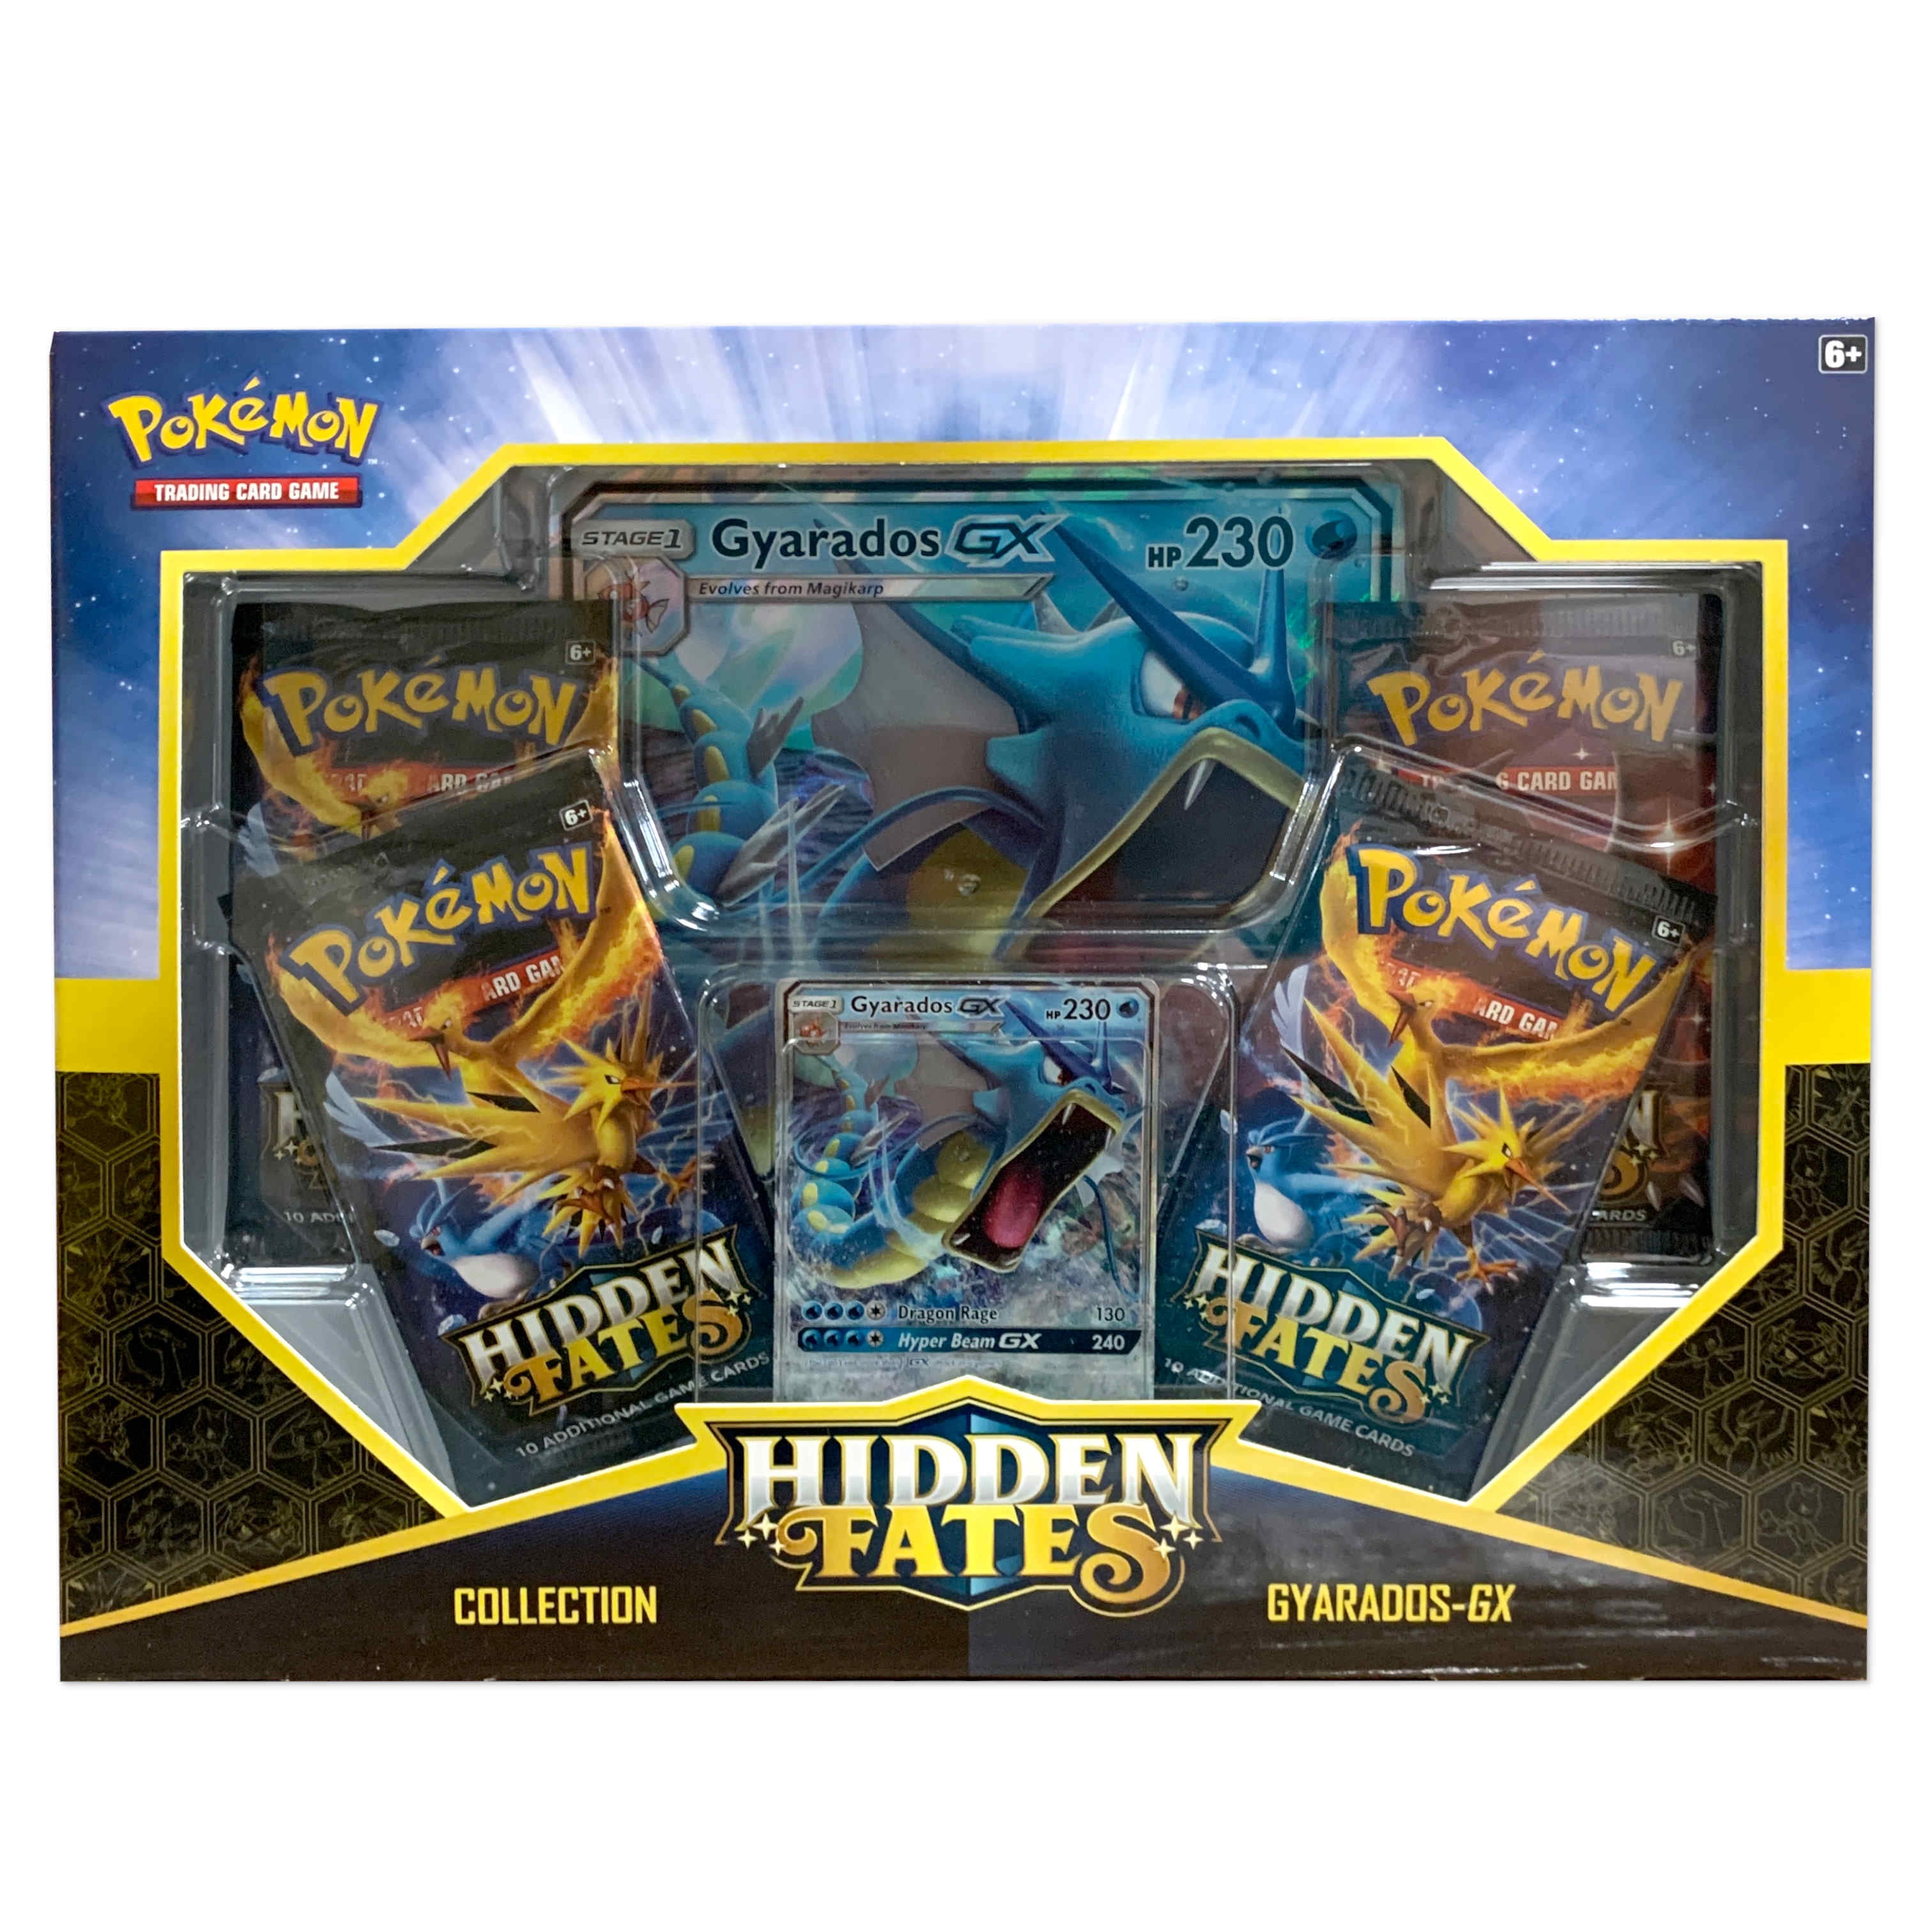 4 2019 Sealed Pokemon Sun & Moon Hidden Fates booster packs 1st Print from 2019! 